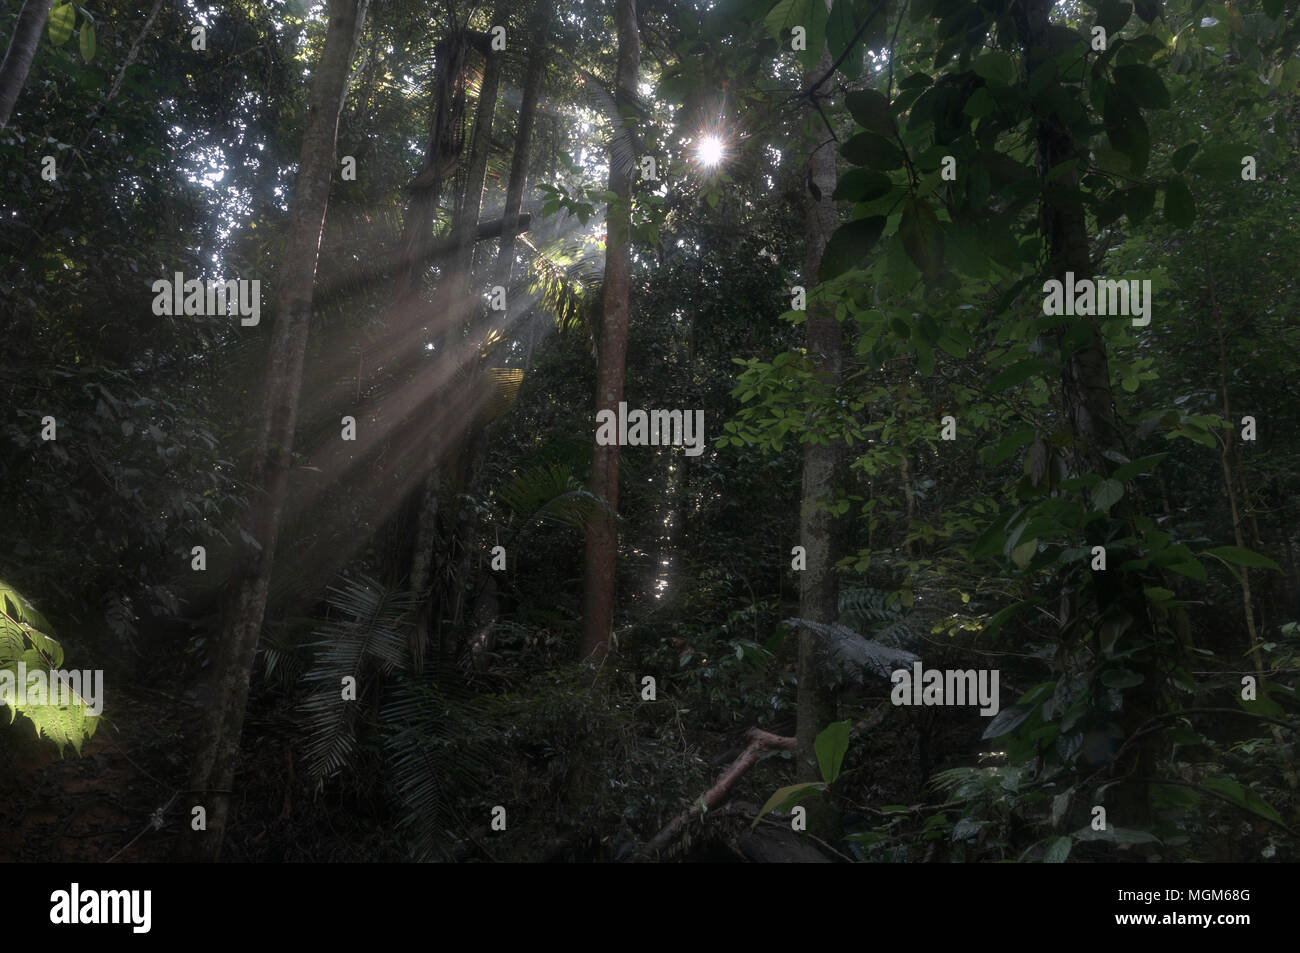 Early Morning Light Passing Through Rain Forest Foliage Stock Photo